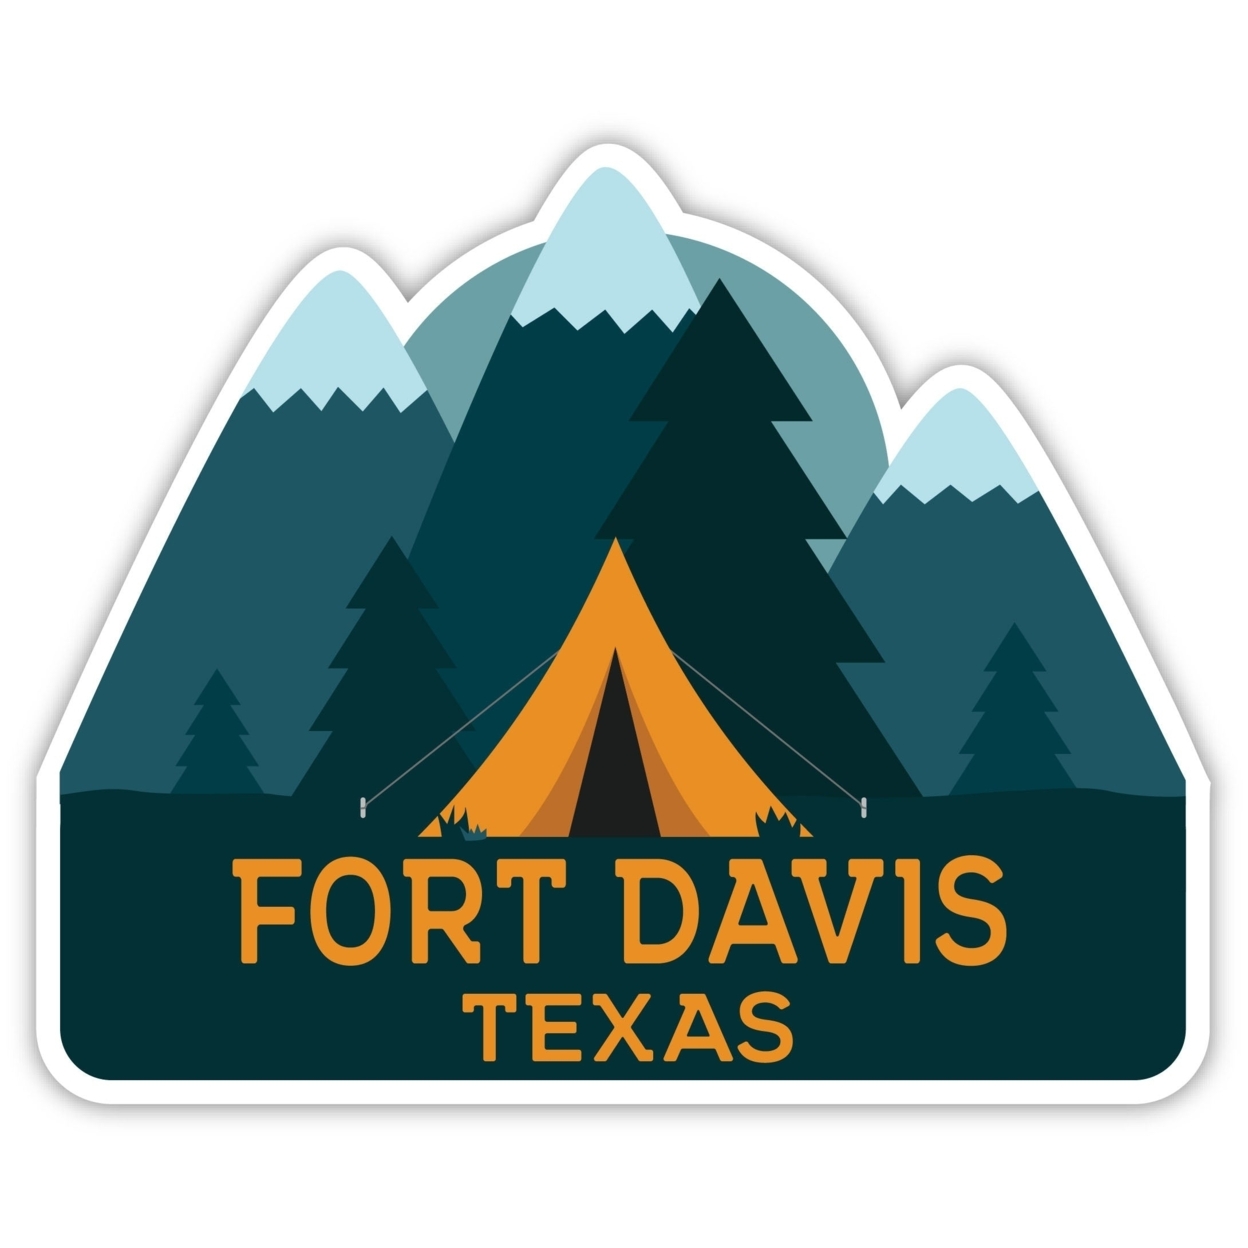 Fort Davis Texas Souvenir Decorative Stickers (Choose Theme And Size) - 4-Pack, 10-Inch, Bear